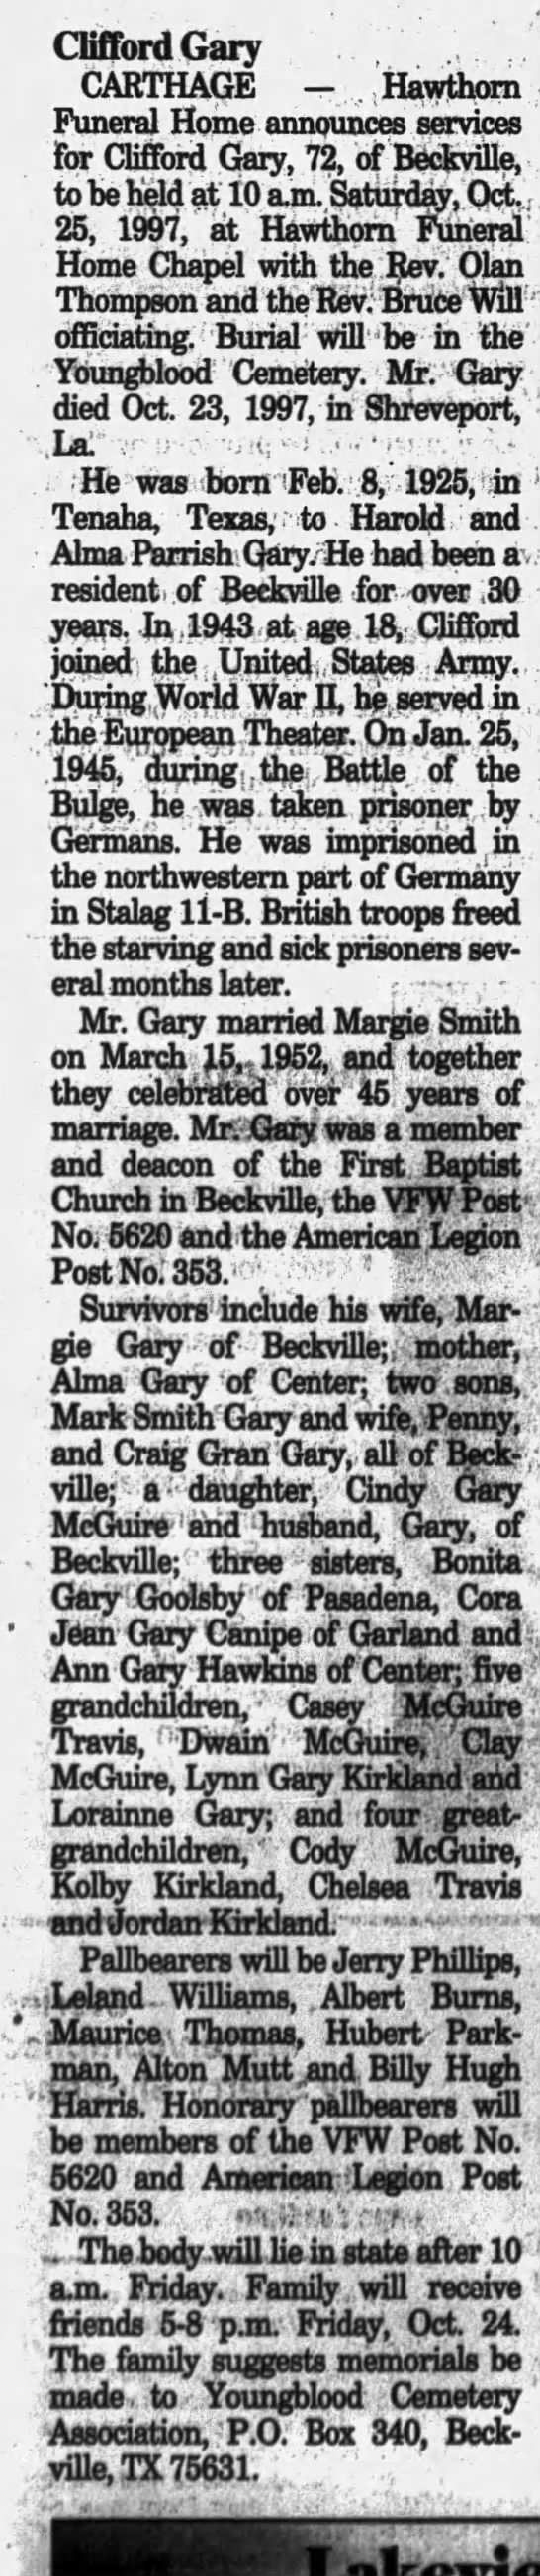 Obituary for Clifford Gary, 1925-1997 (Aged 72)